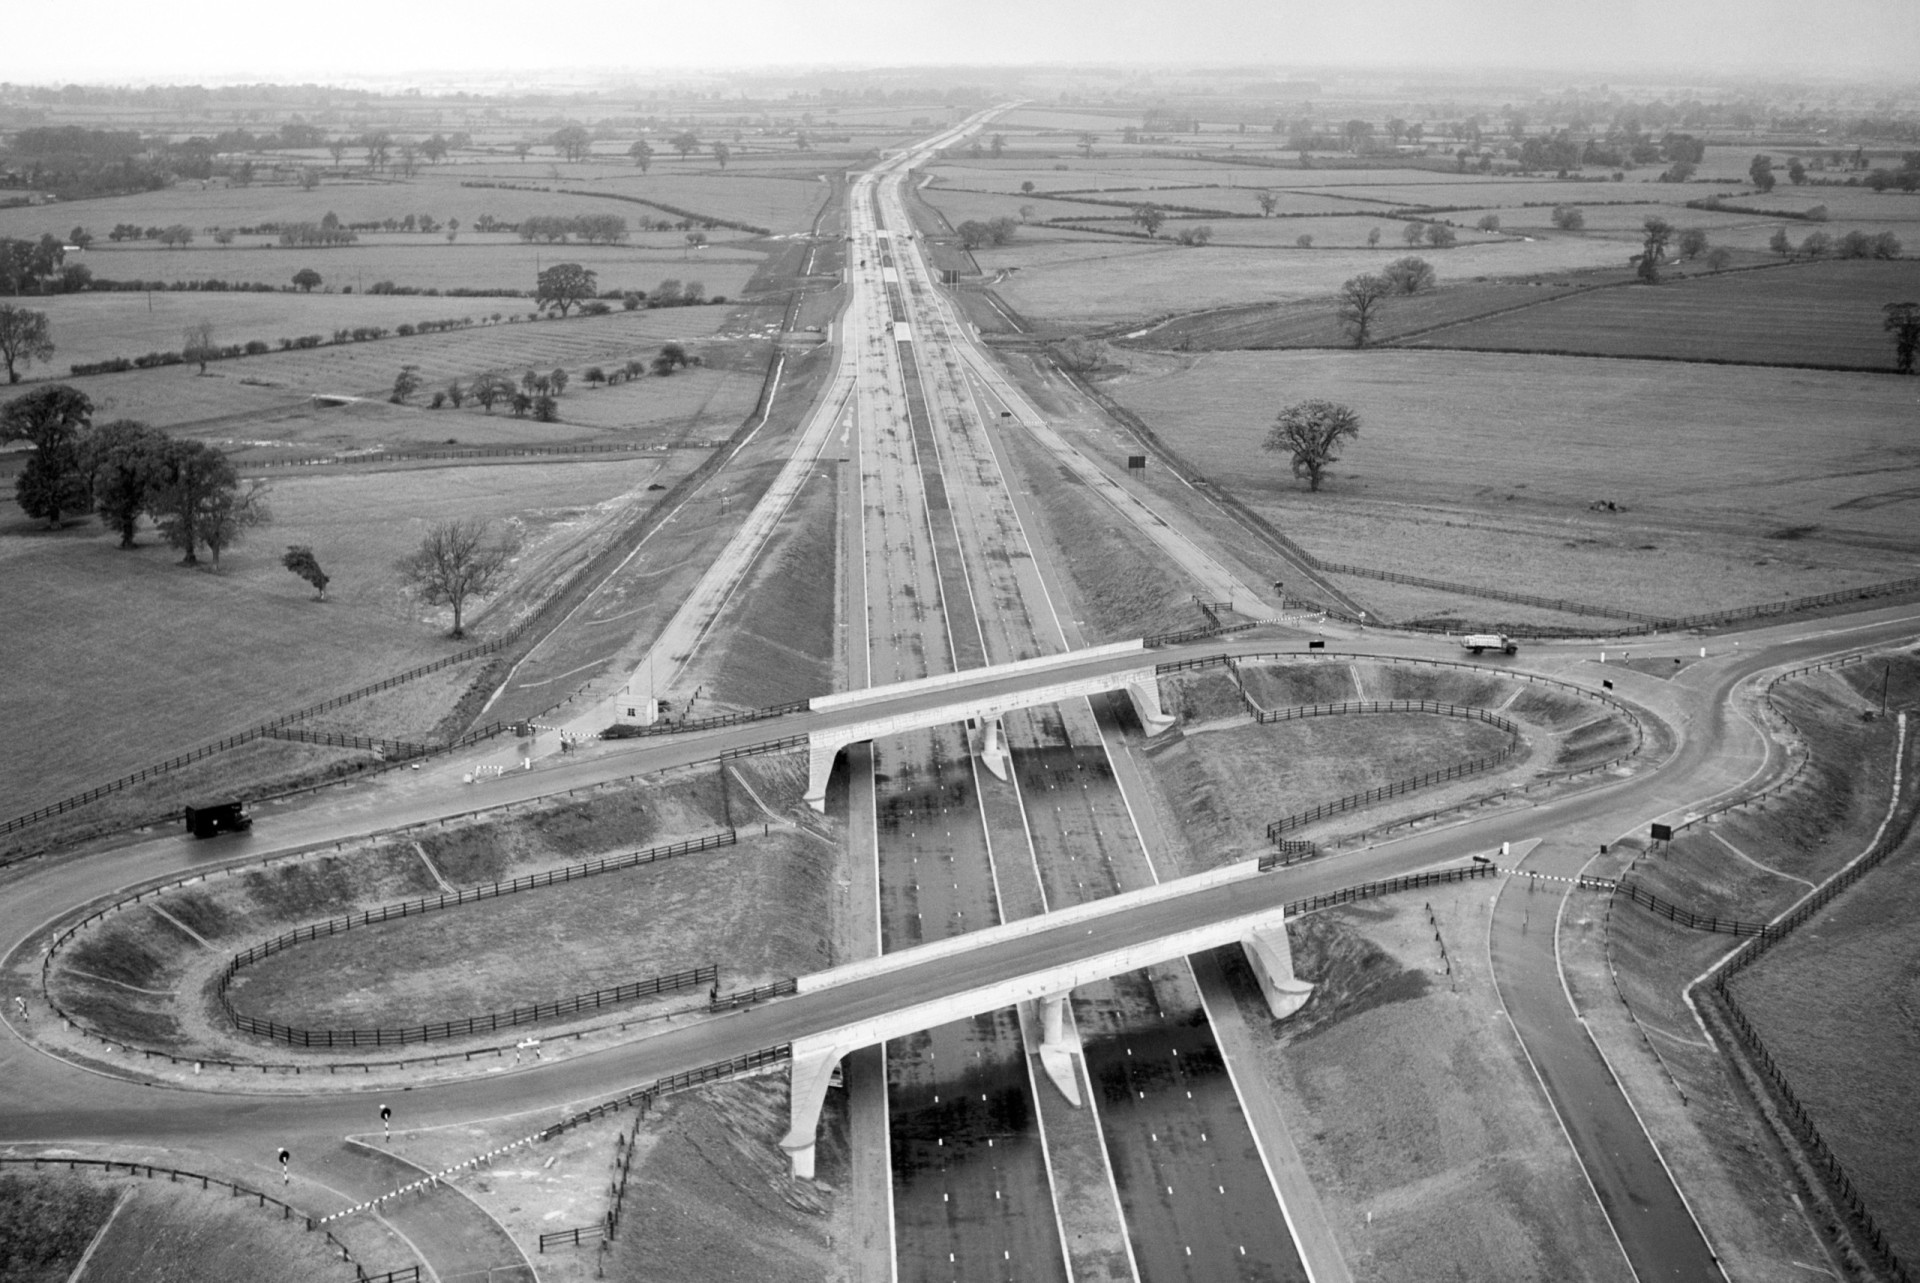 <p>Britain's first full-length motorway was the M1. Opened in 1959, it connected London with Leeds. Pictured is a section under construction showing the Broughton roundabout at the junction with the Dunstable and Newport Pagnell roads.</p><p><a href="https://www.msn.com/en-us/community/channel/vid-7xx8mnucu55yw63we9va2gwr7uihbxwc68fxqp25x6tg4ftibpra?cvid=94631541bc0f4f89bfd59158d696ad7e">Follow us and access great exclusive content every day</a></p>